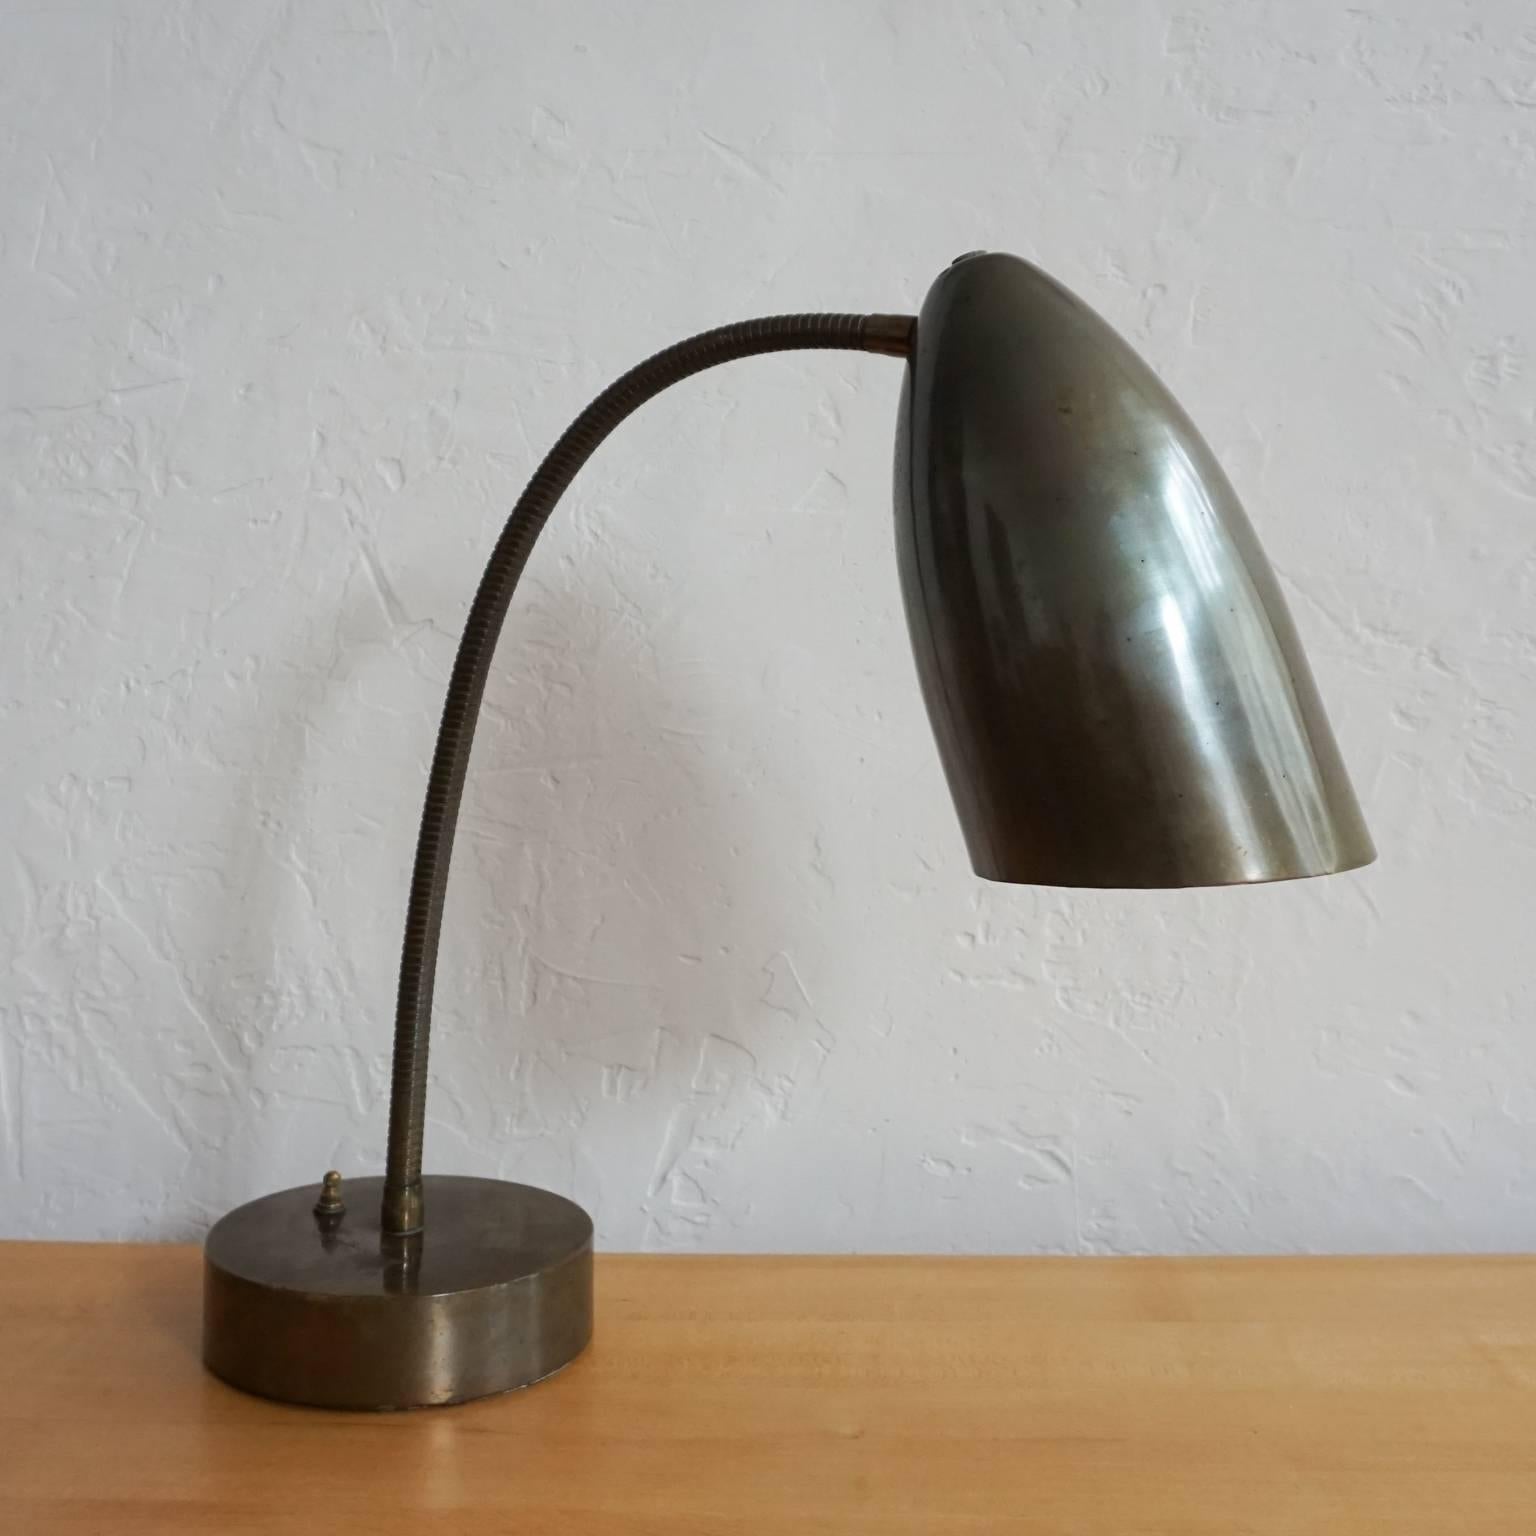 1950s adjustable desk lamp produced by the boutique San Francisco lighting company, Bulmore. The quality and substantial build quality of this lamp is unmatched. 

Dudley Bulmore and his son Robert ran the lighting company. Robert lived in an